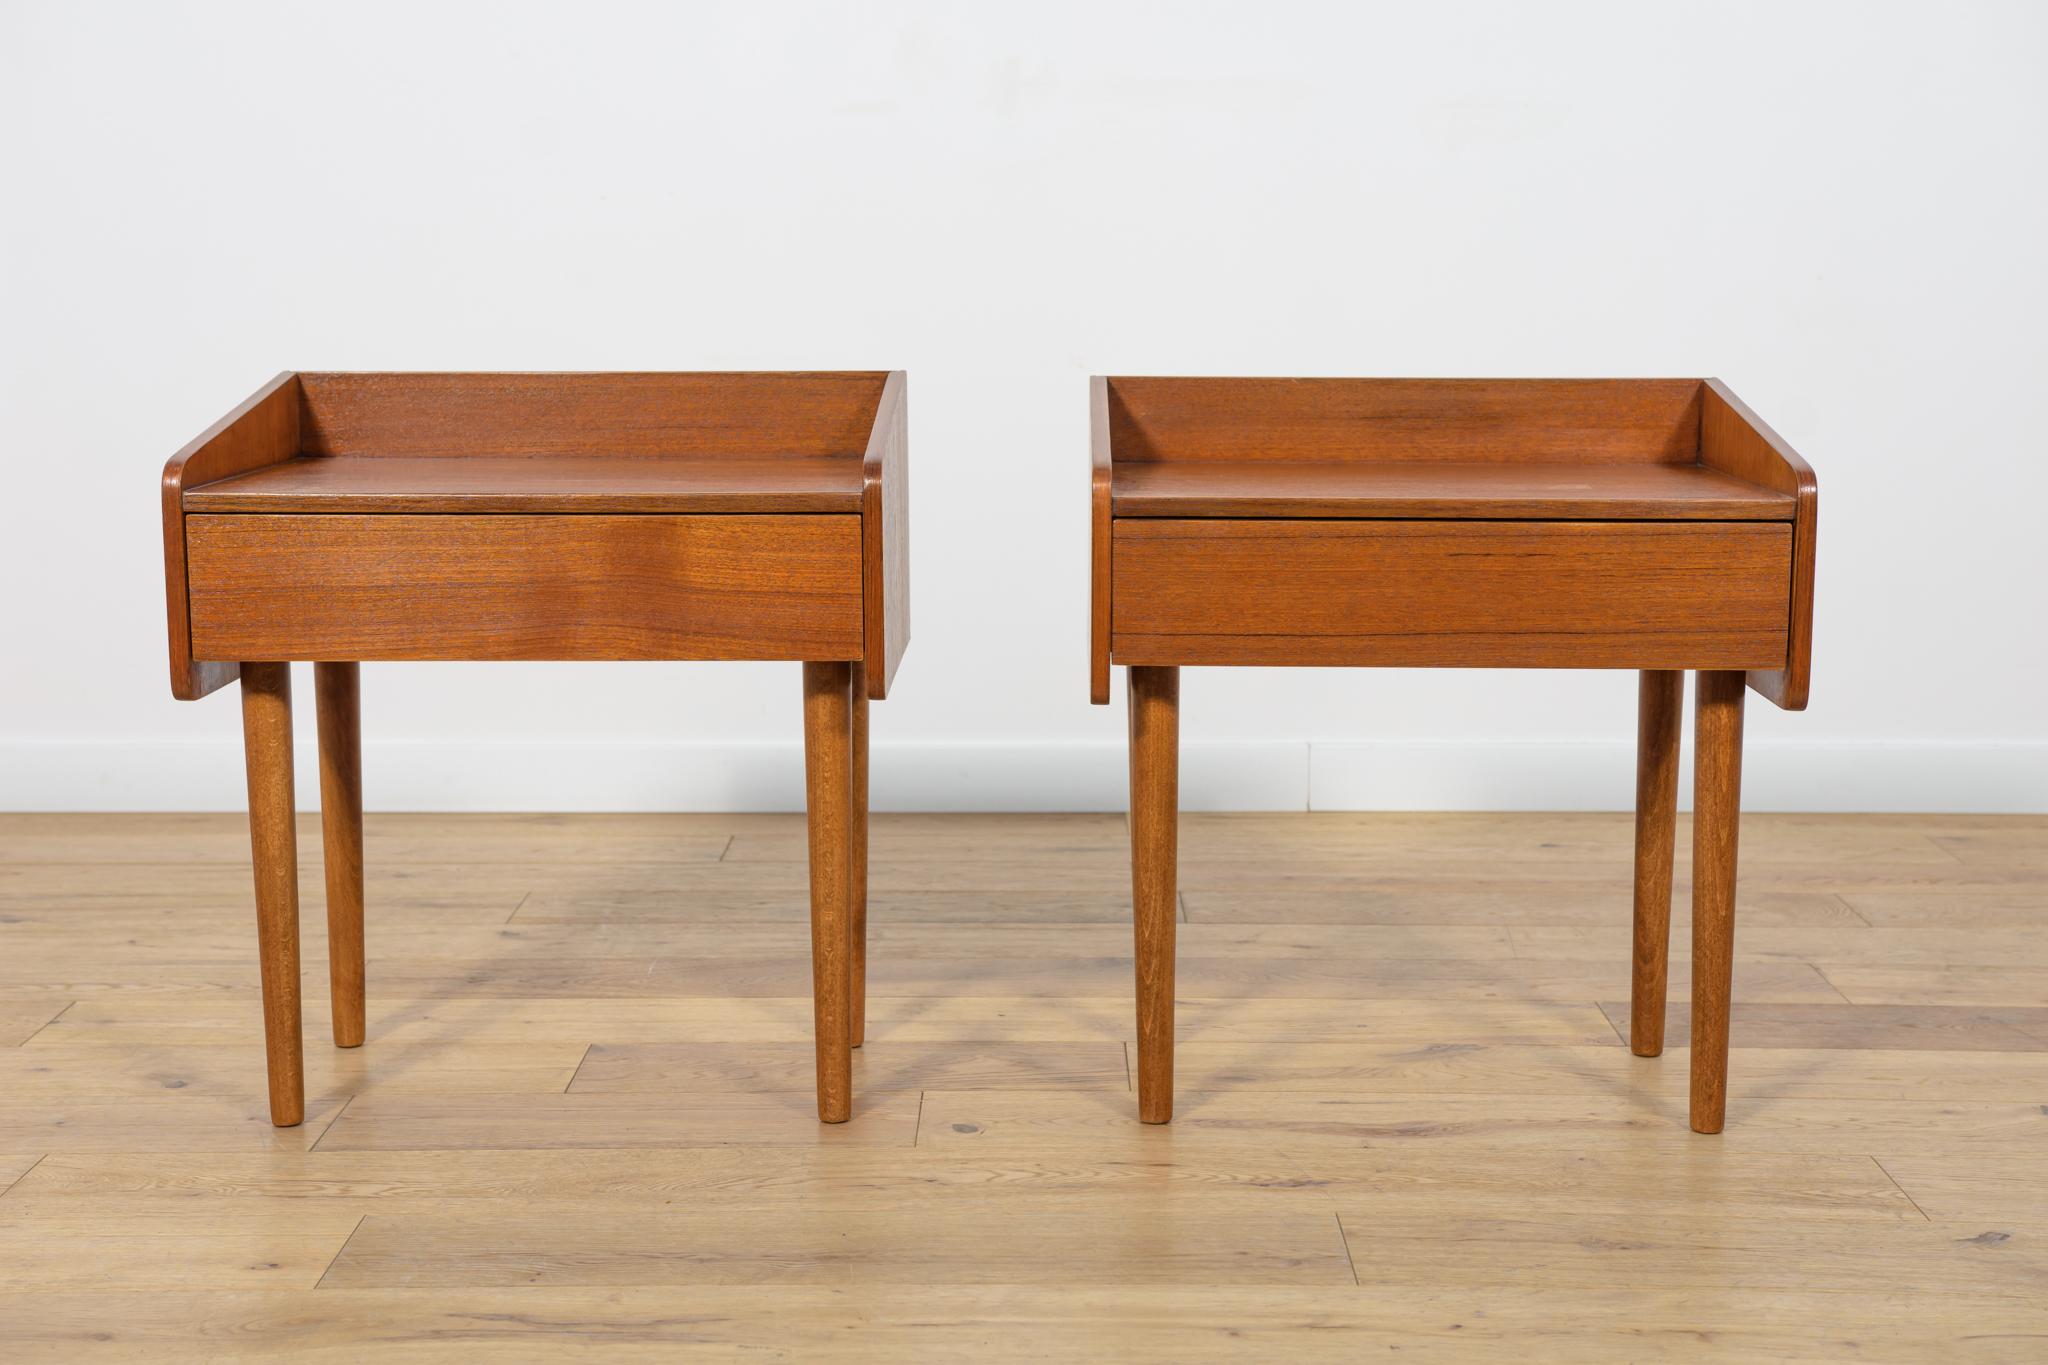 
A pair of bedside tables made in the 1960s in Denmark. Legs made of teak wood. The whole after a comprehensive renovation, the wood has been cleaned from the old surface, painted with oak stain, finished with high-quality Danish oil.